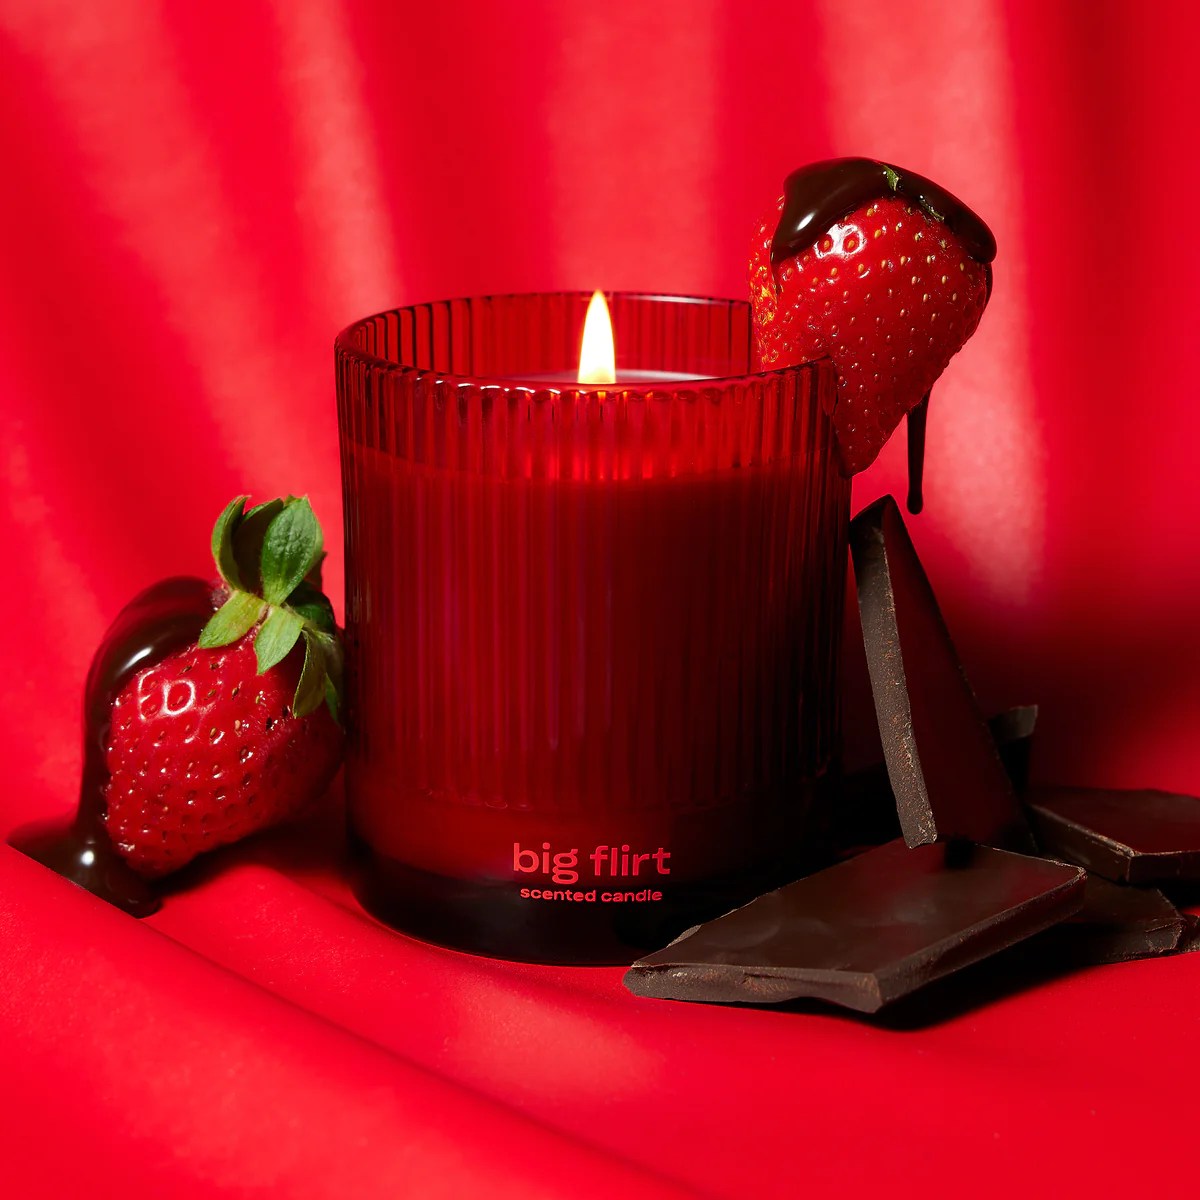 Snif big flirt, one of the best valentine's day candles